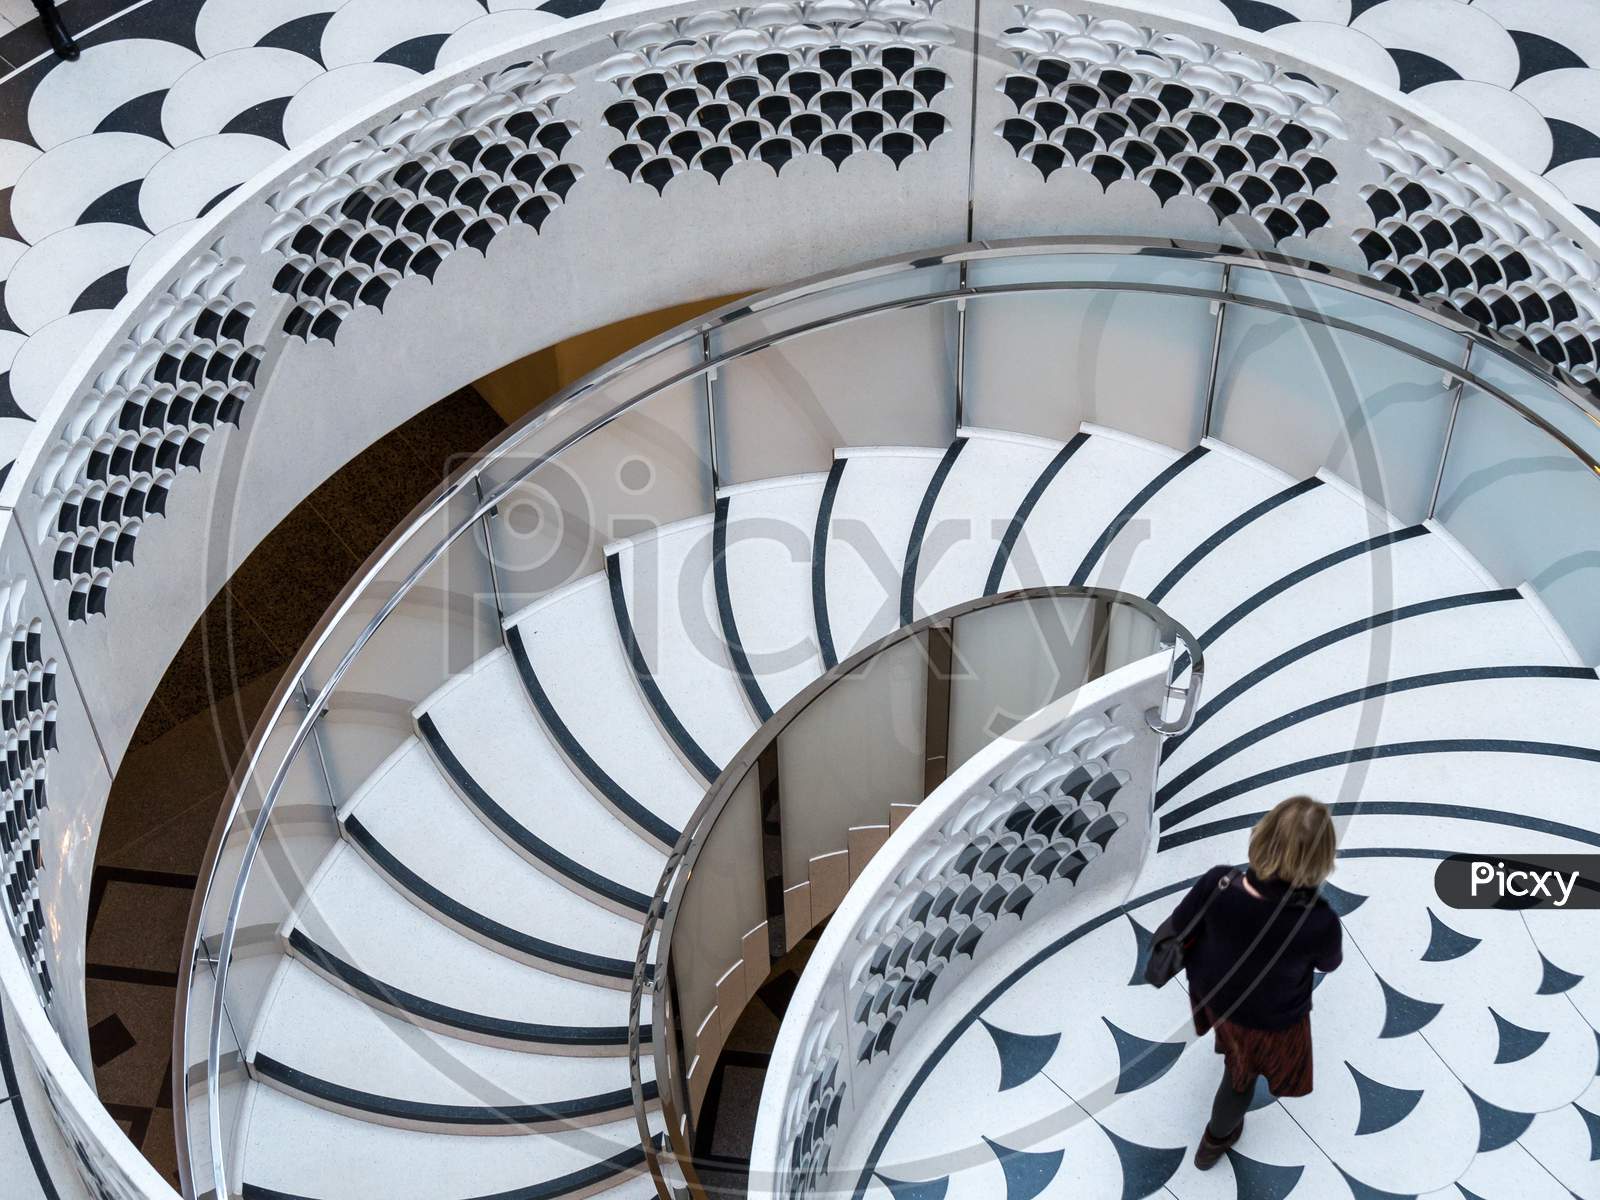 Tate Britain Spiral Staircase In London